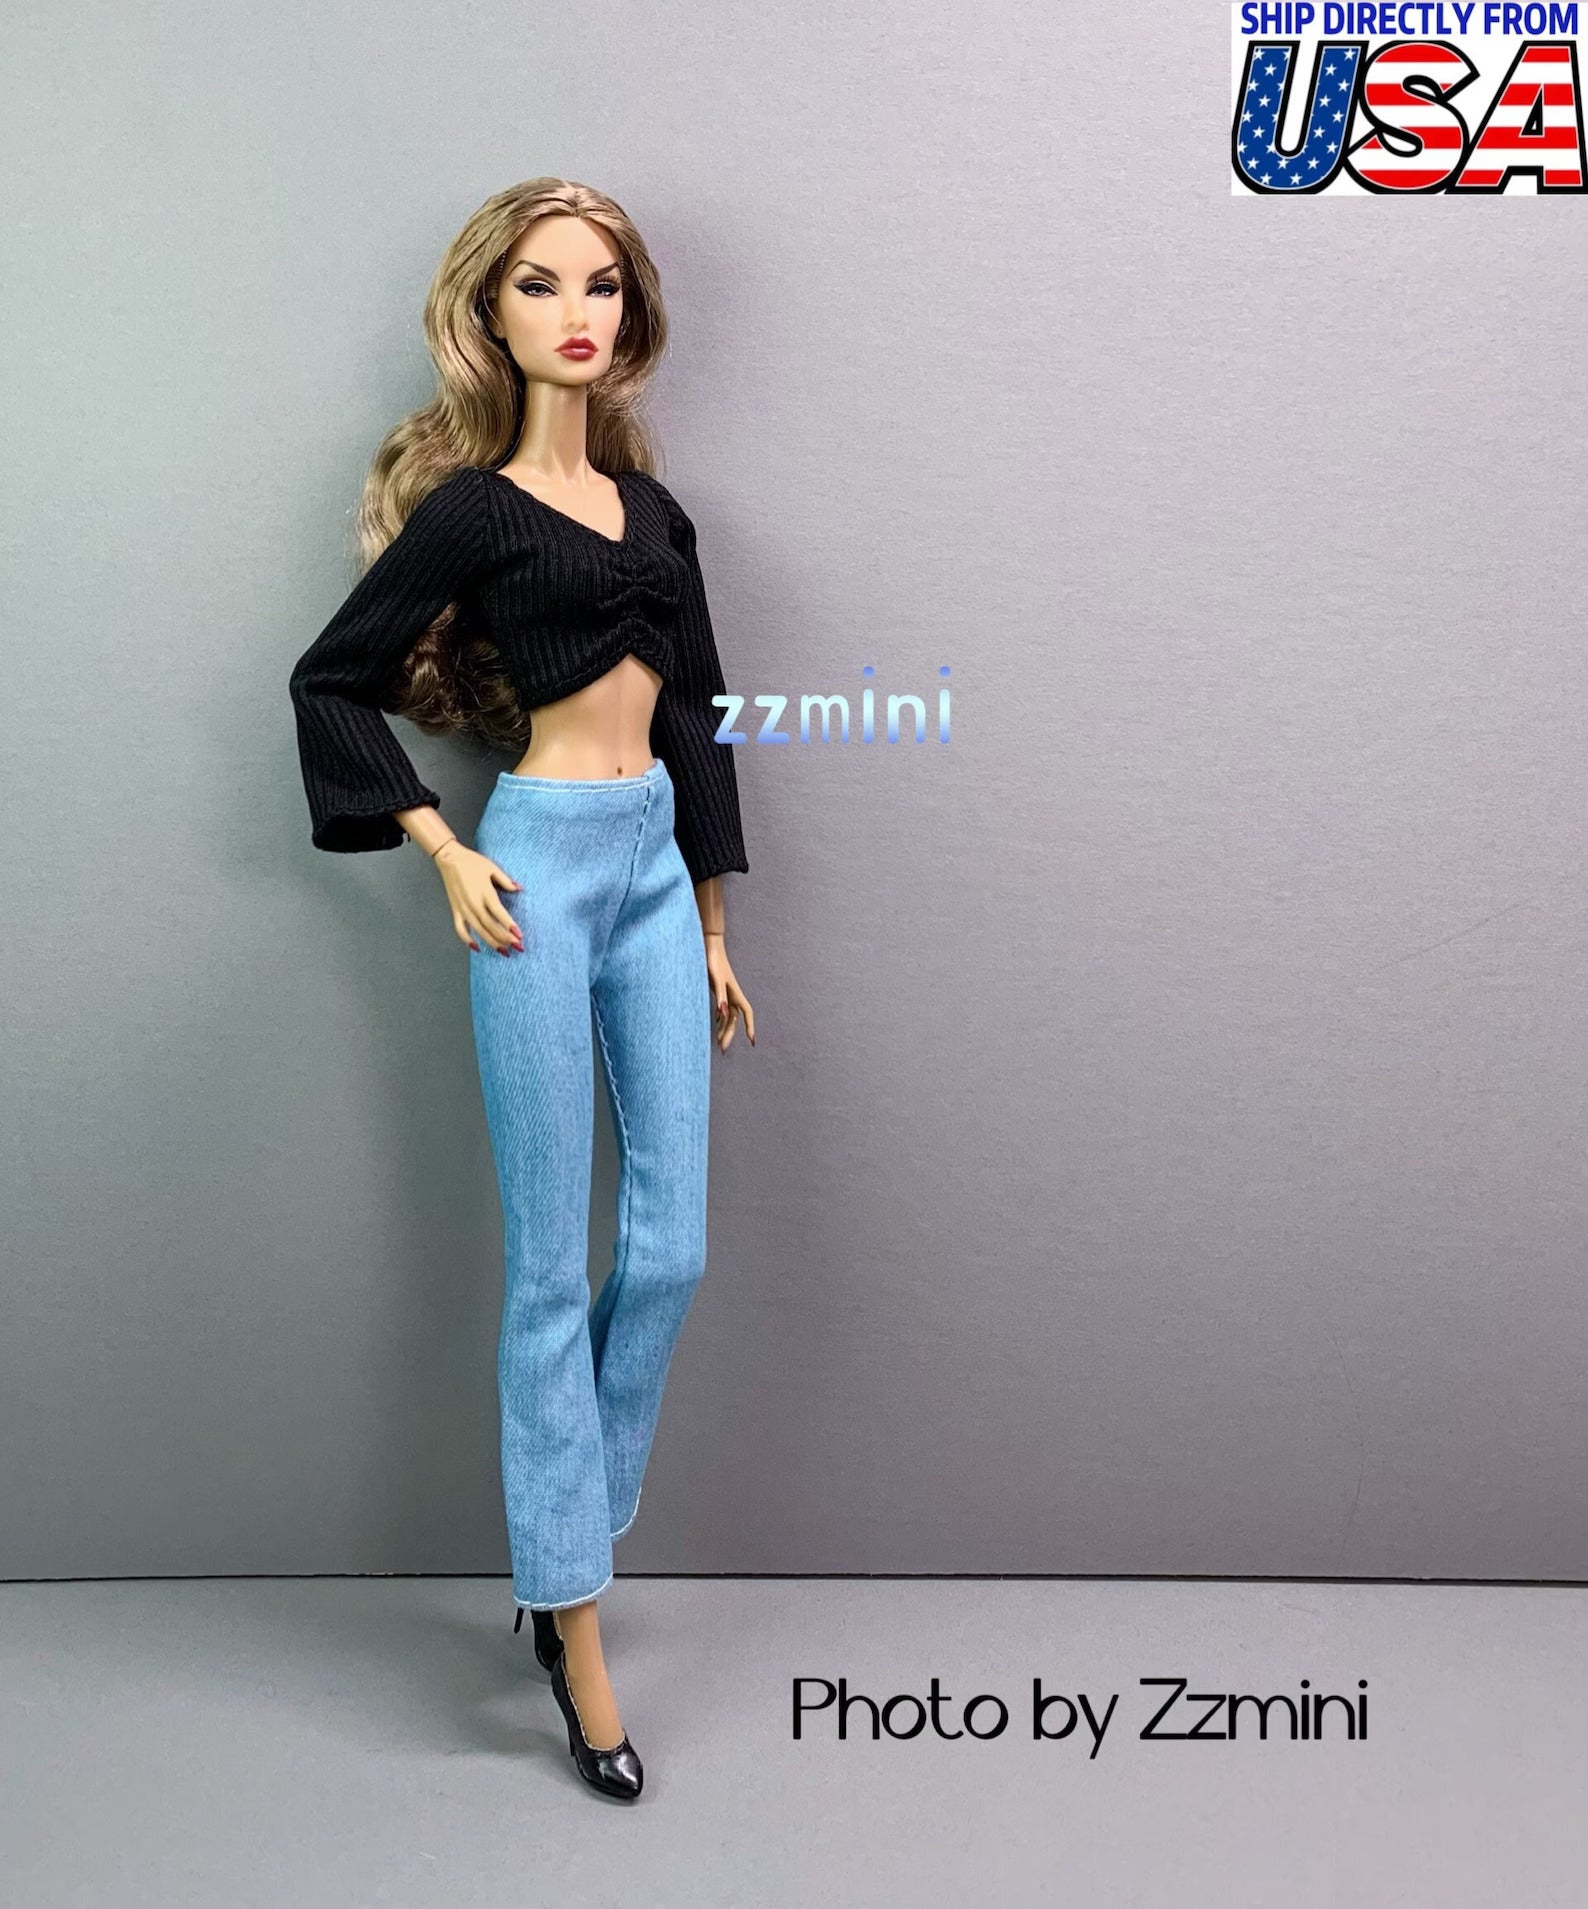 2pcs Handmade Black Sleeves and Jeans For 11.5inch Fashion Doll Princess Top Doll Clothes 1/6 Toy